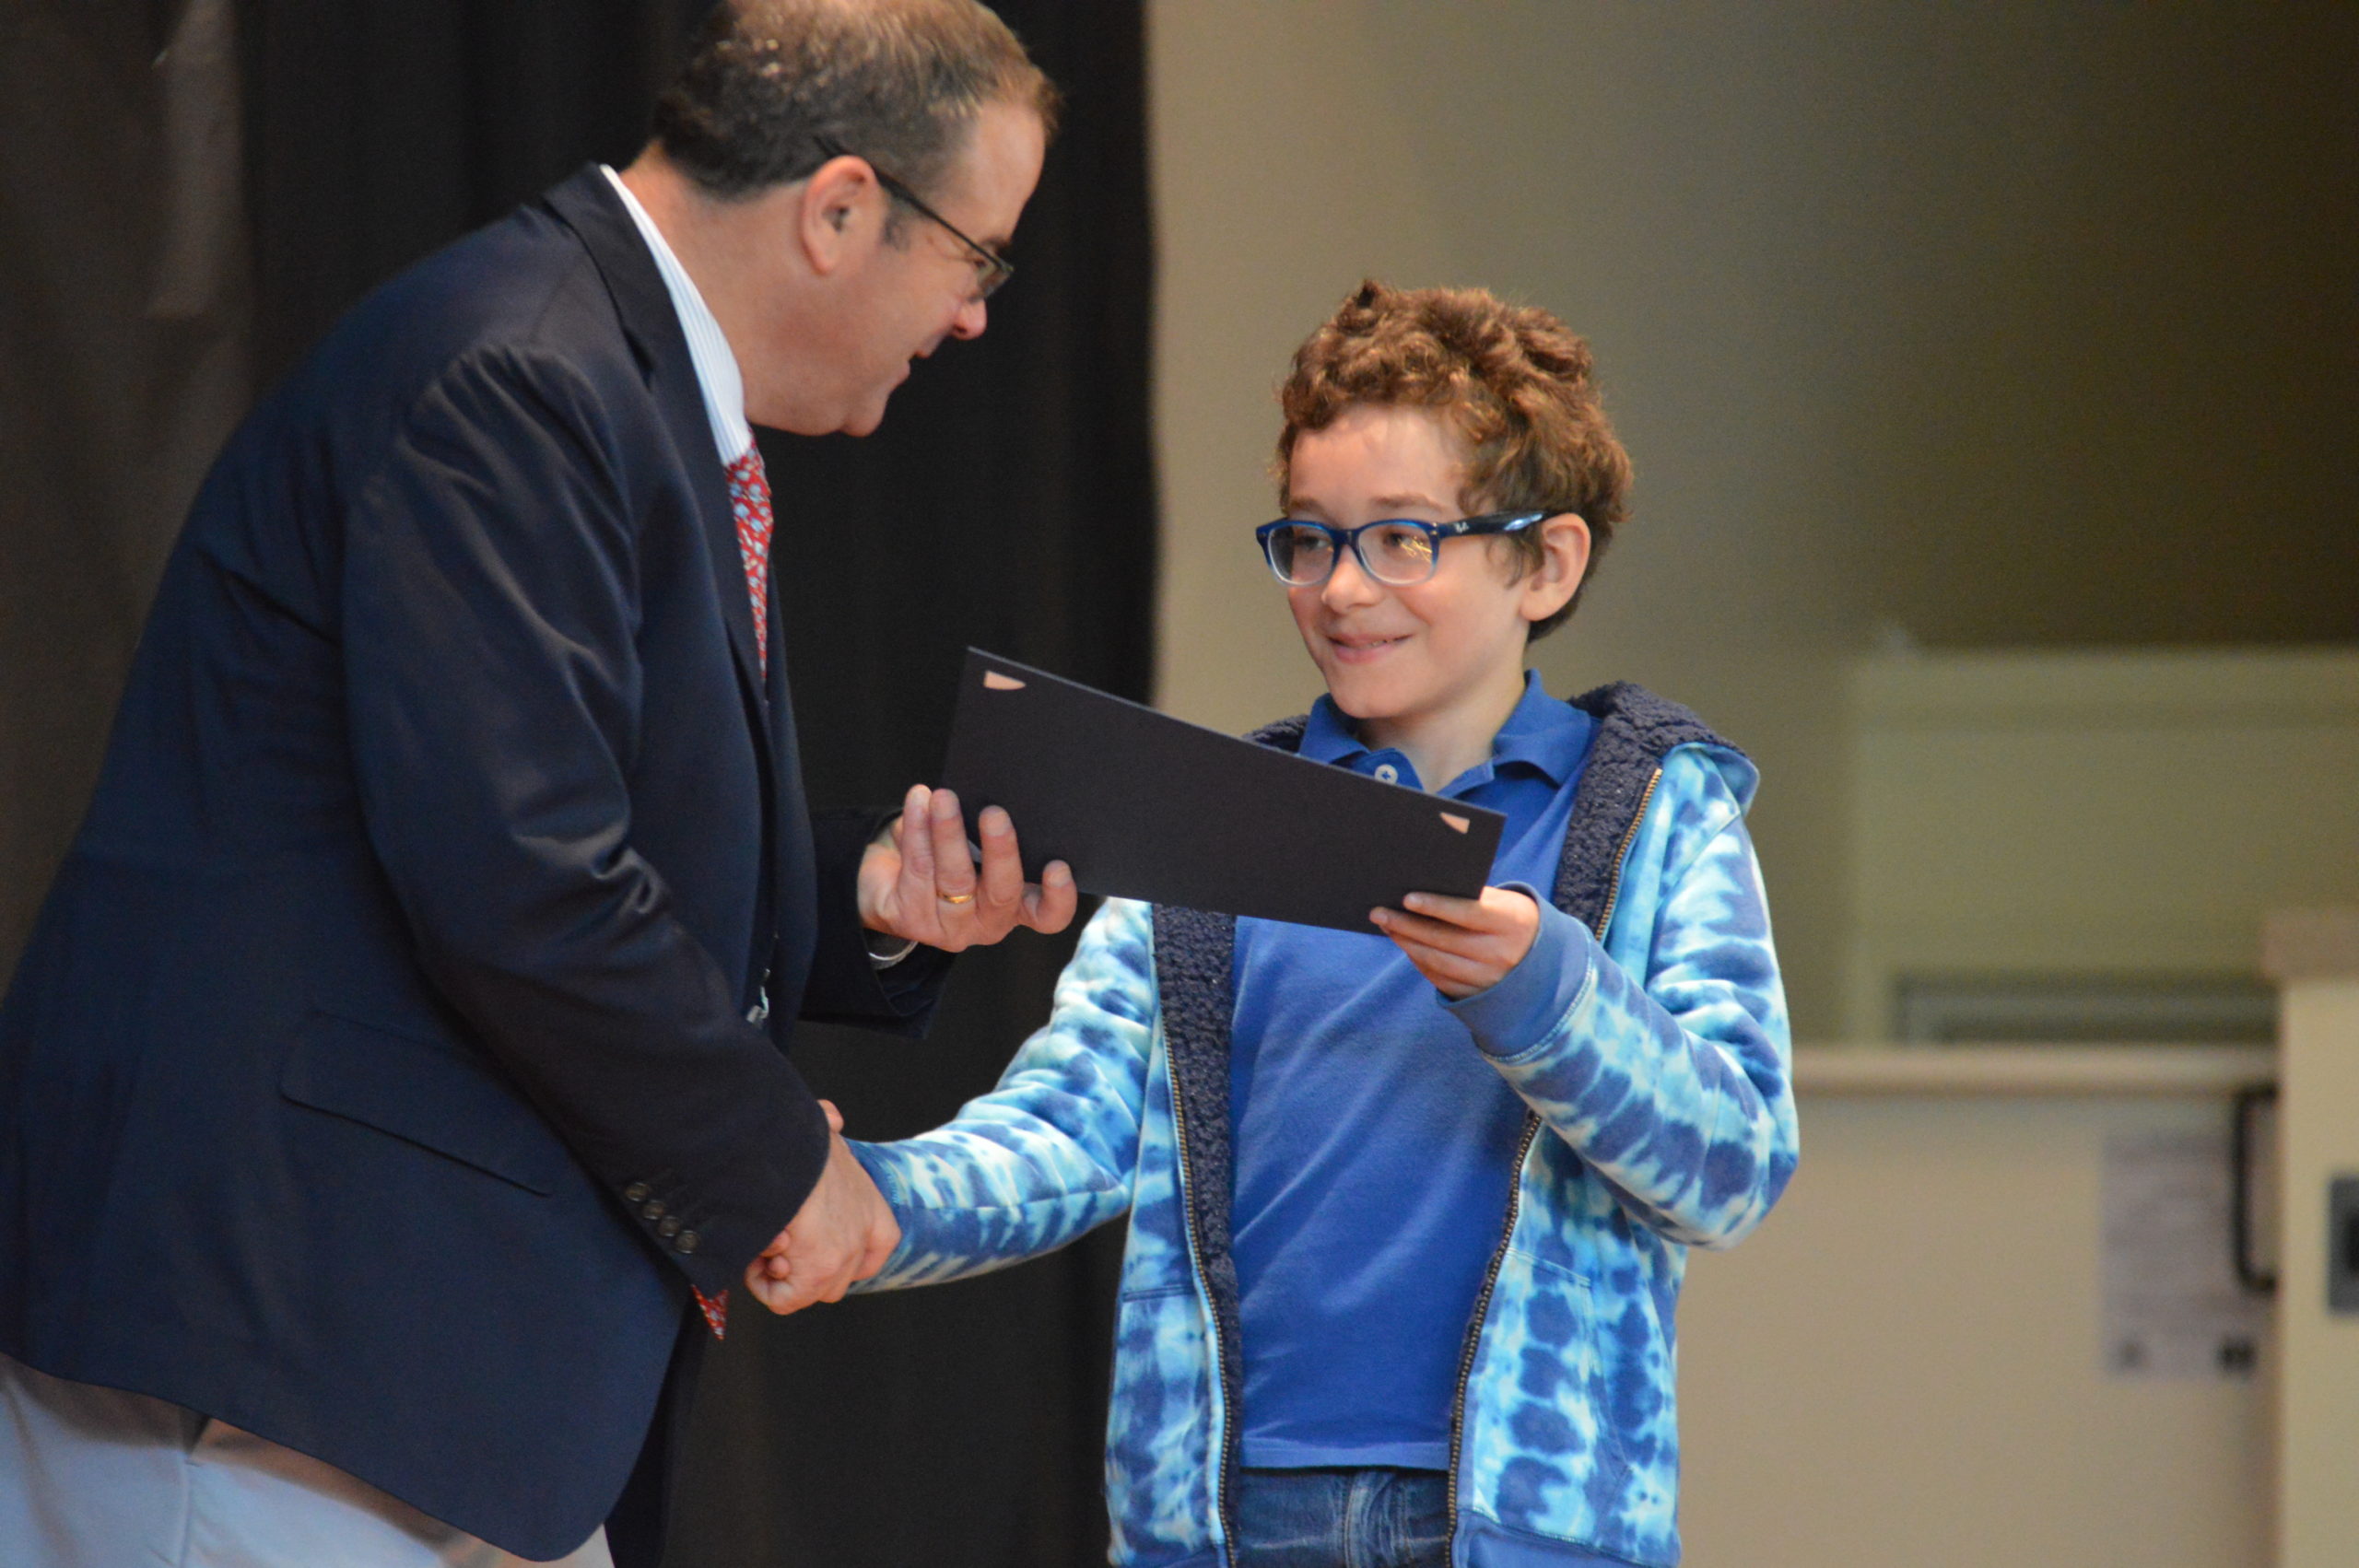 Student receives certificate at Green Meadow Moving Up Ceremony